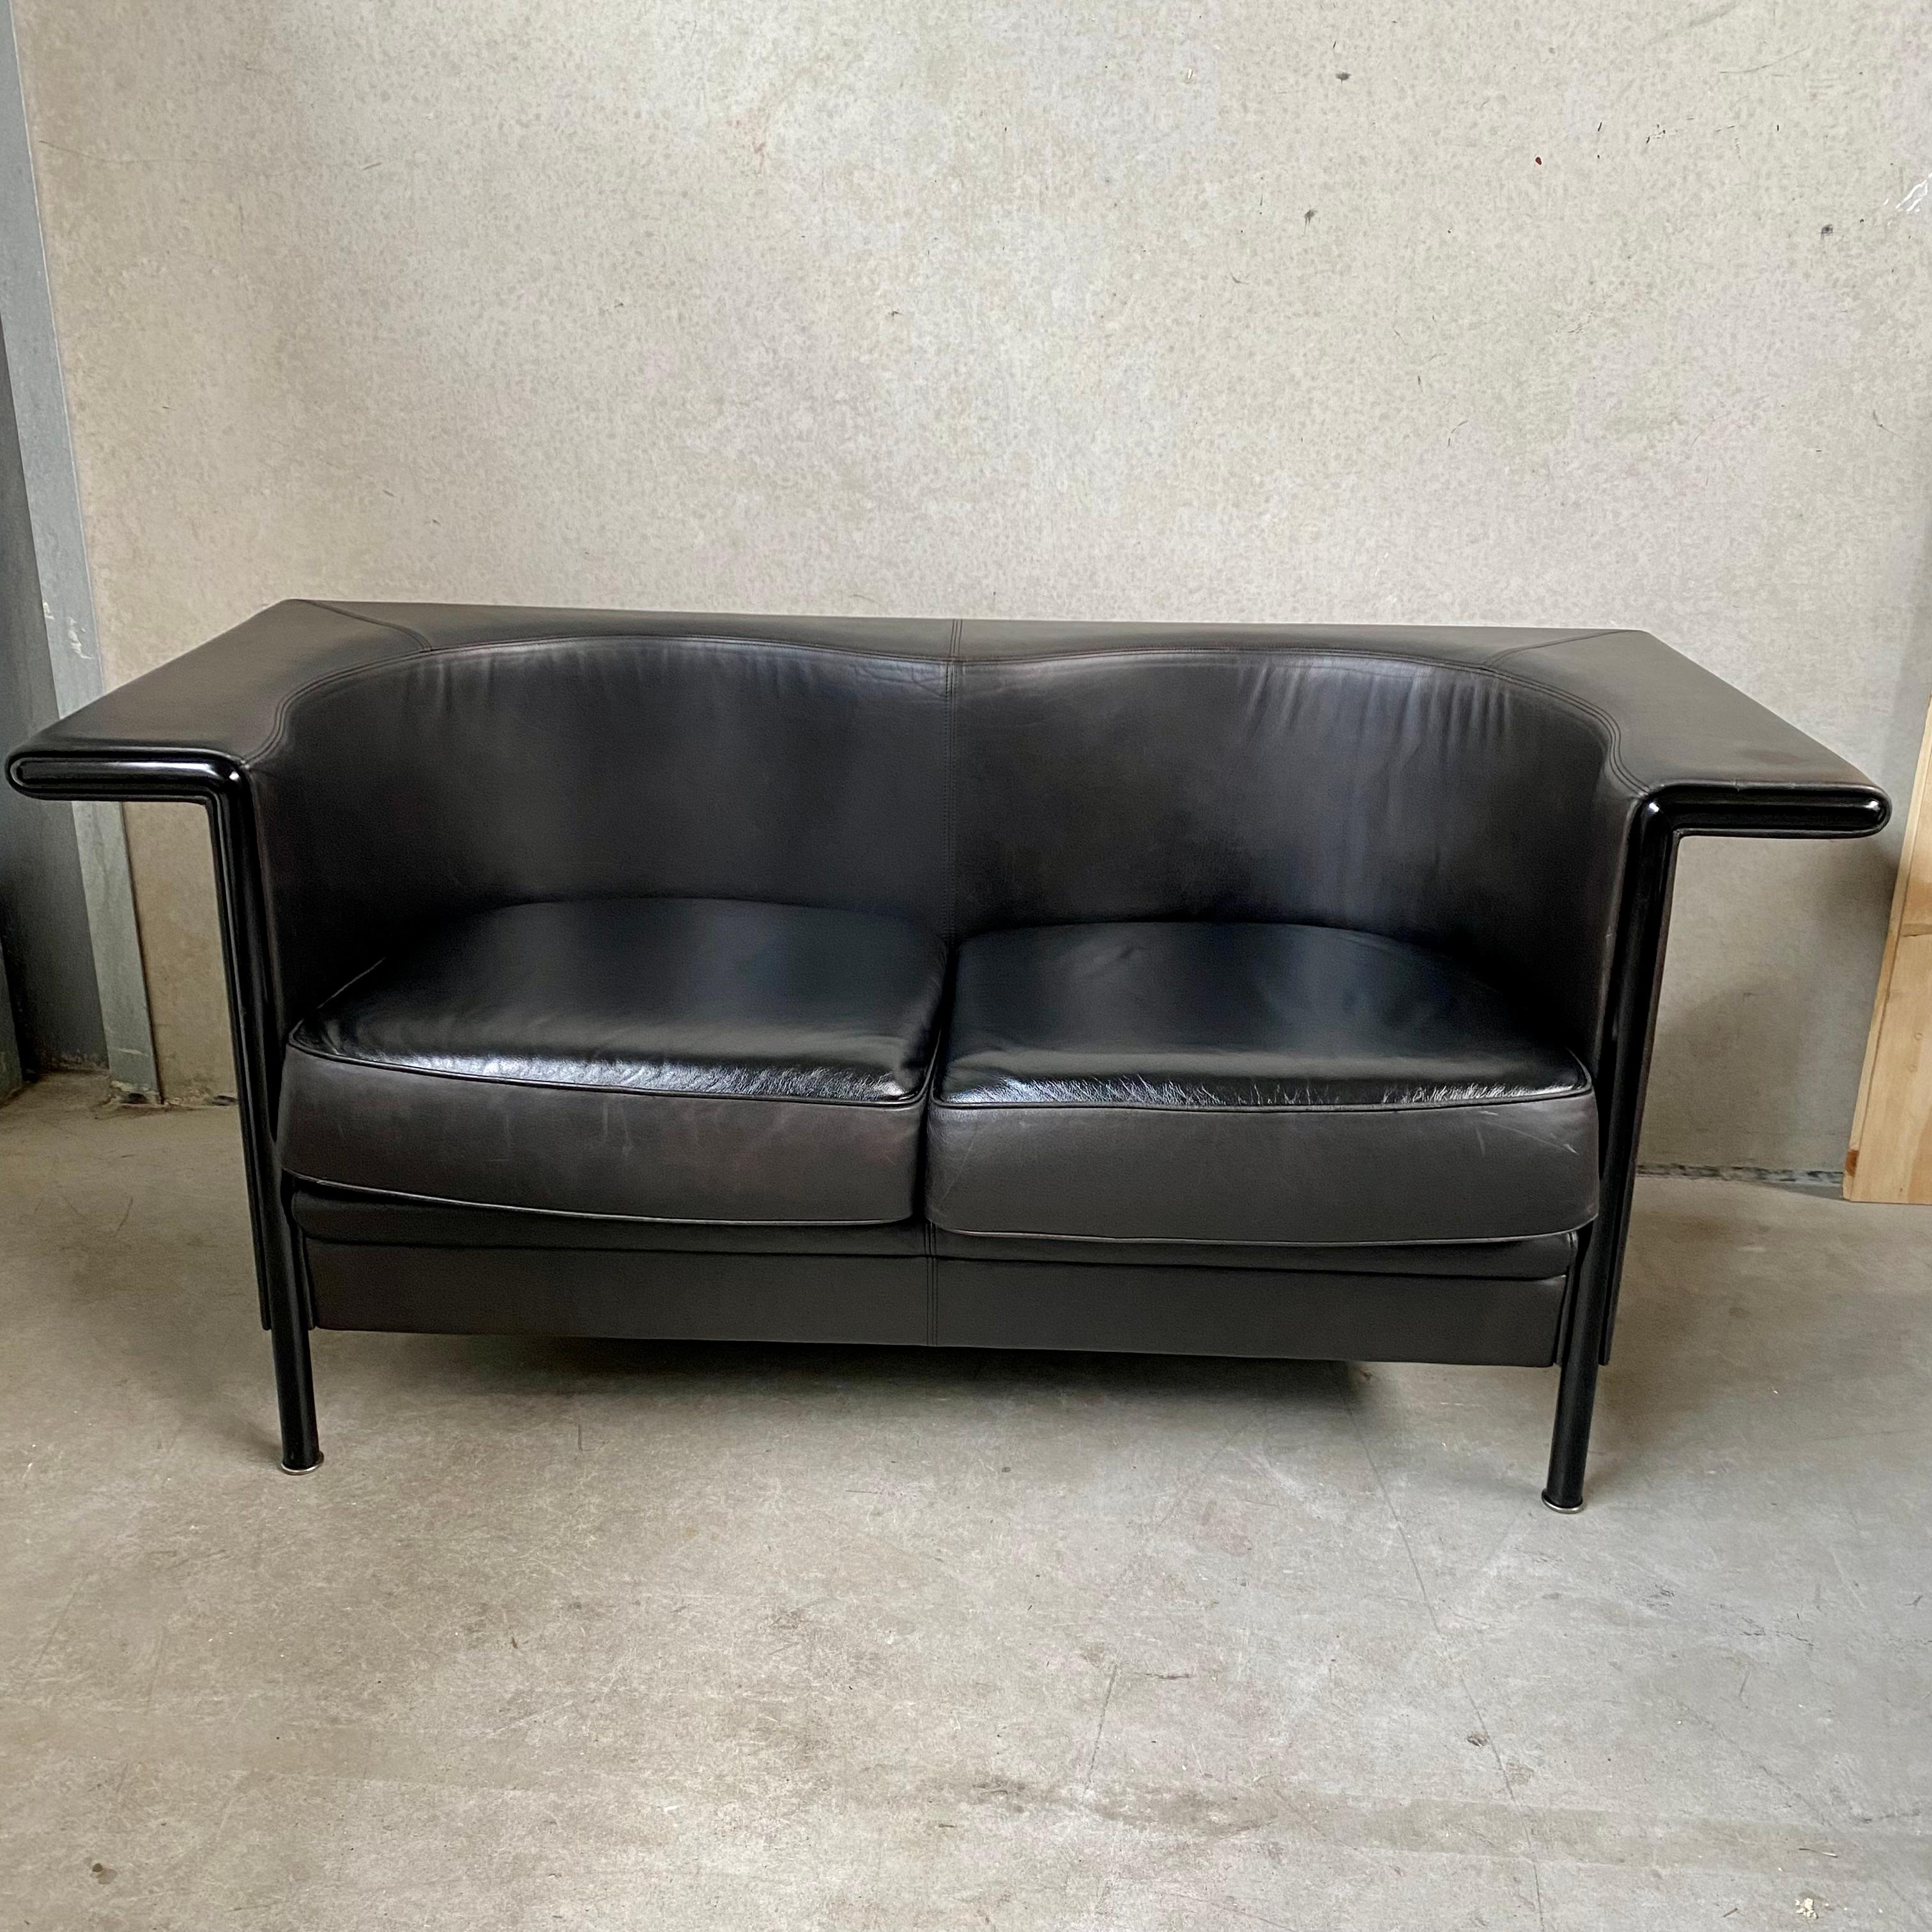 Introducing the vintage Antonio Citterio for Moroso Model 'Cricket' Sofa in dark brown leather. This Italian masterpiece, crafted in 1980, showcases the remarkable talent of Antonio Citterio, a renowned designer celebrated for his exceptional